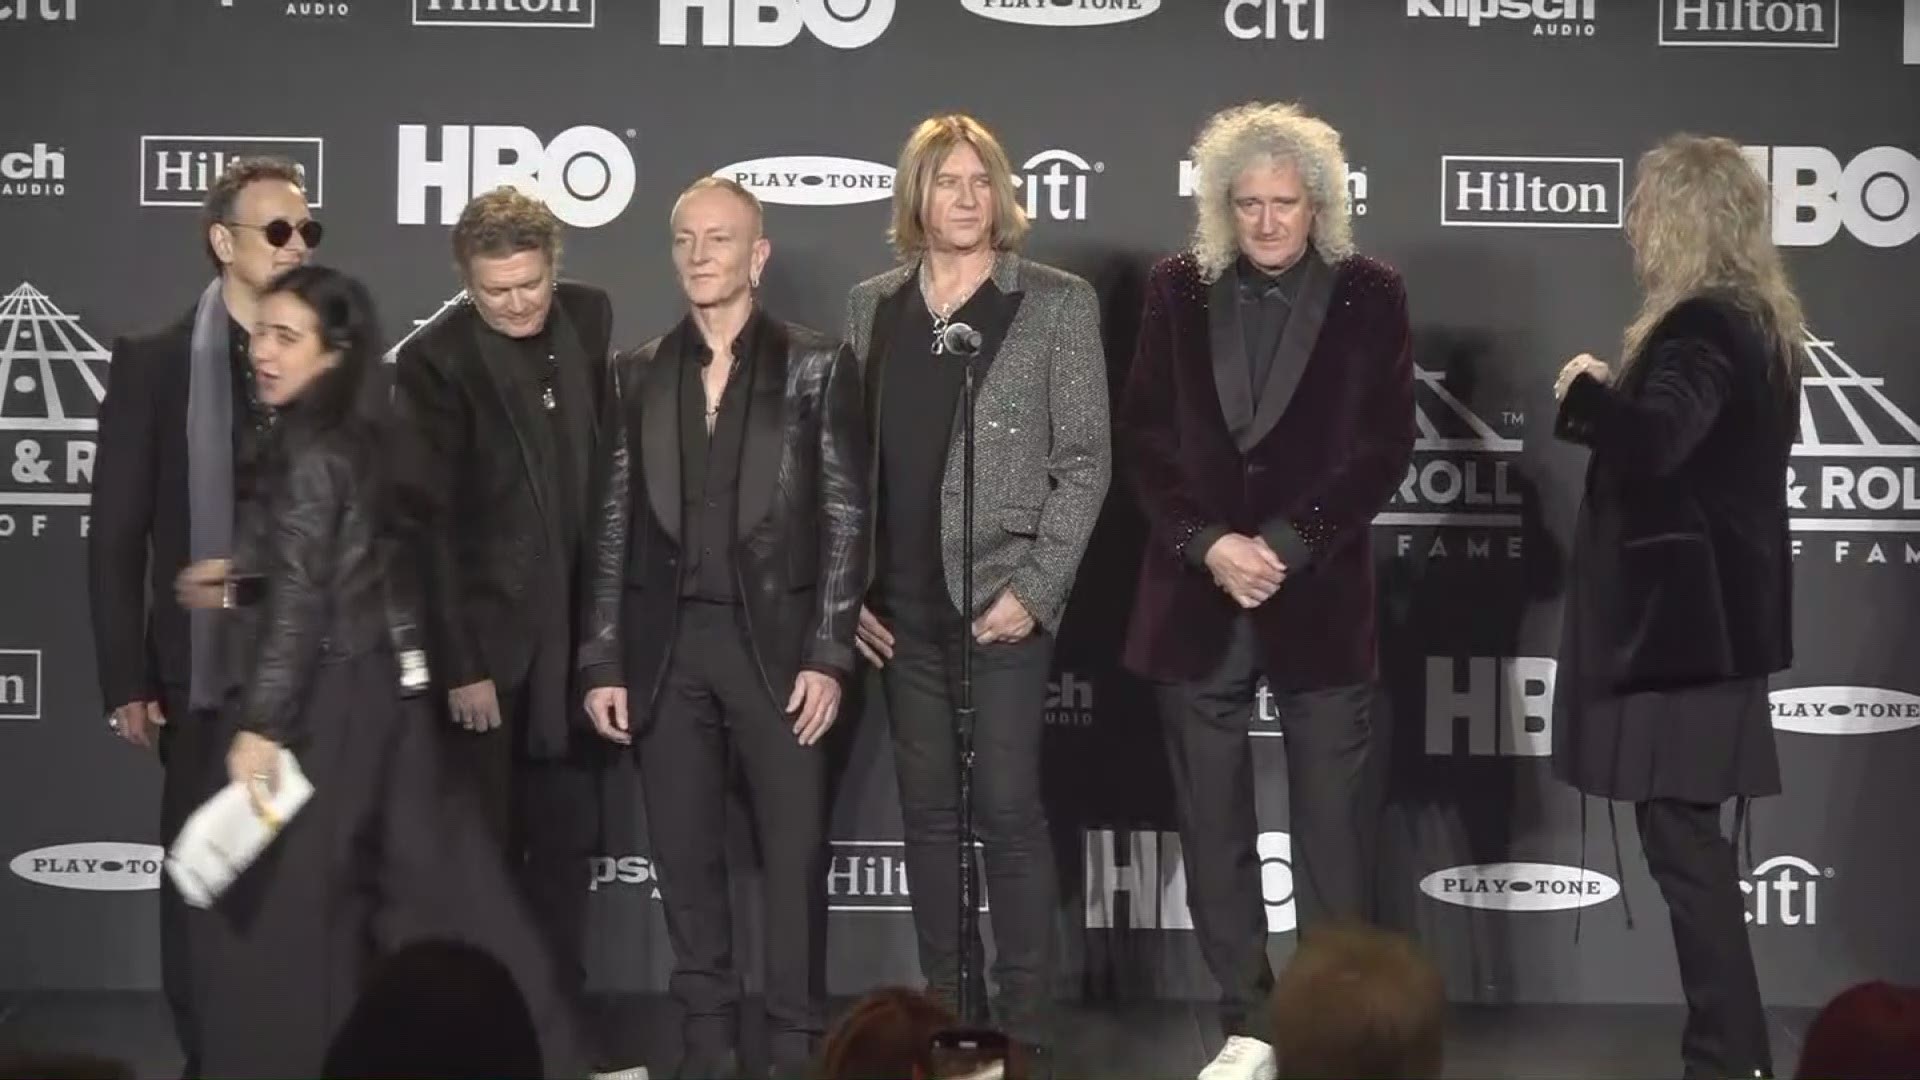 Def Leppard backstage at 2019 Rock & Roll Hall of Fame induction ceremony